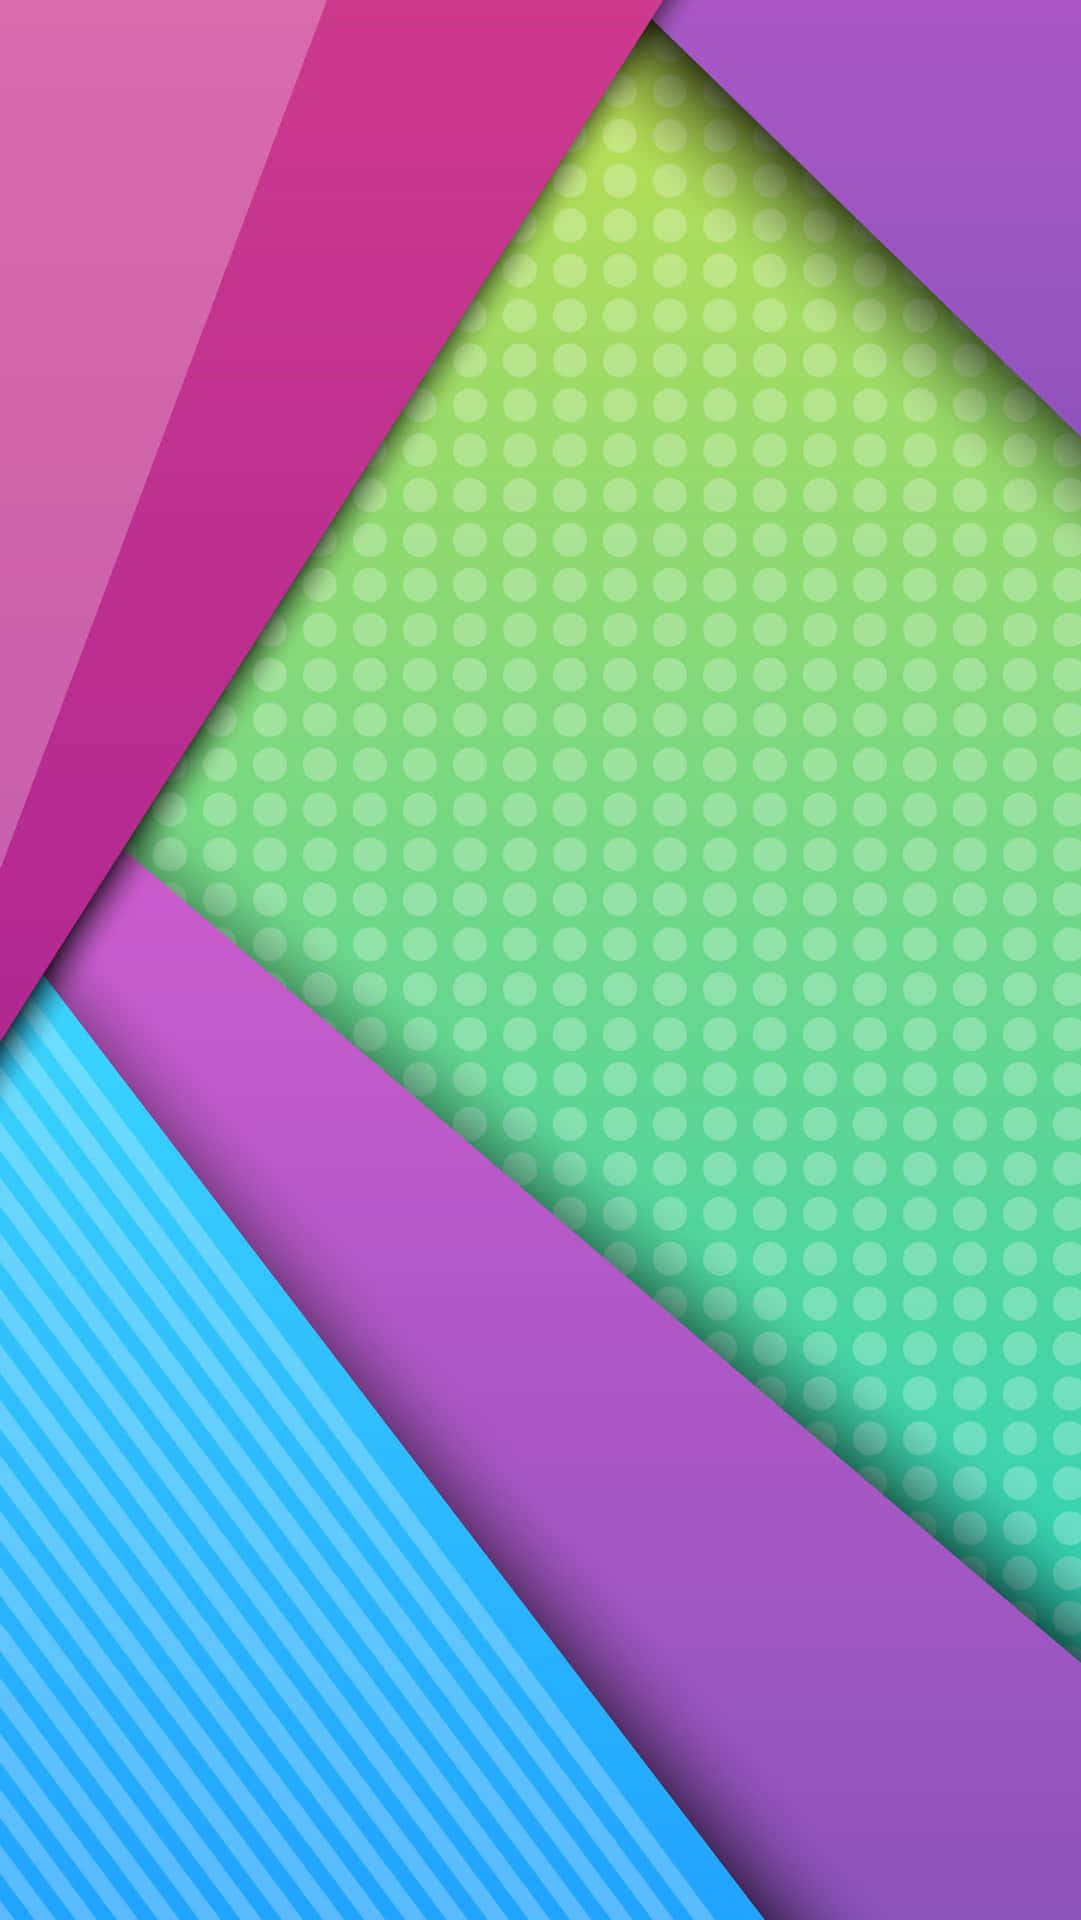 A Colorful Background With Colorful Triangles